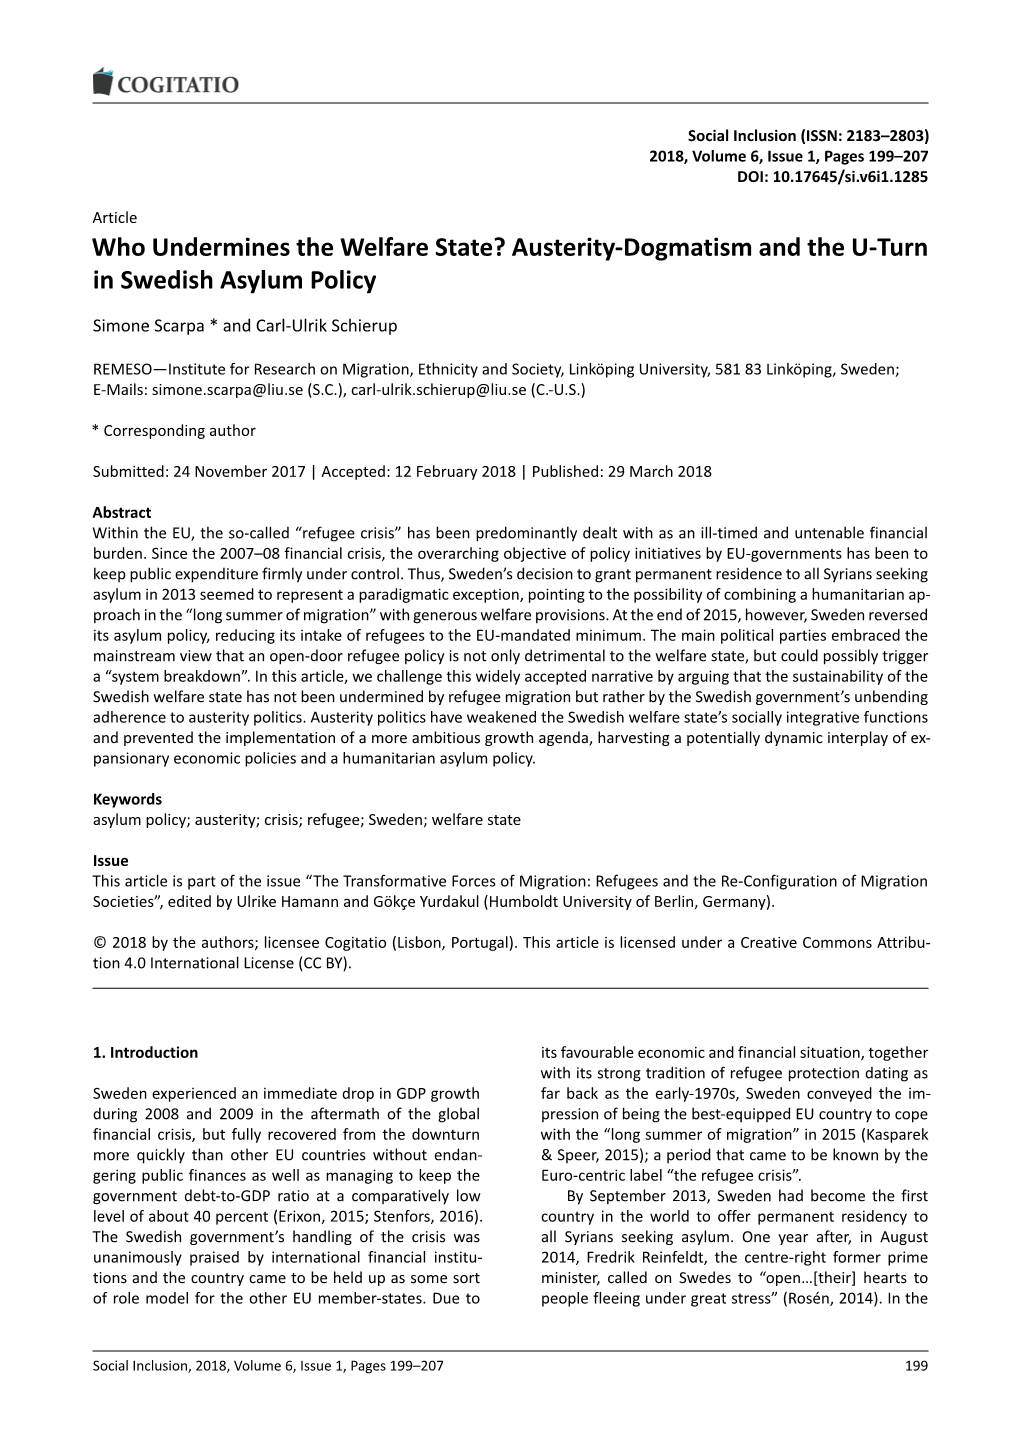 Who Undermines the Welfare State? Austerity-Dogmatism and the U-Turn in Swedish Asylum Policy